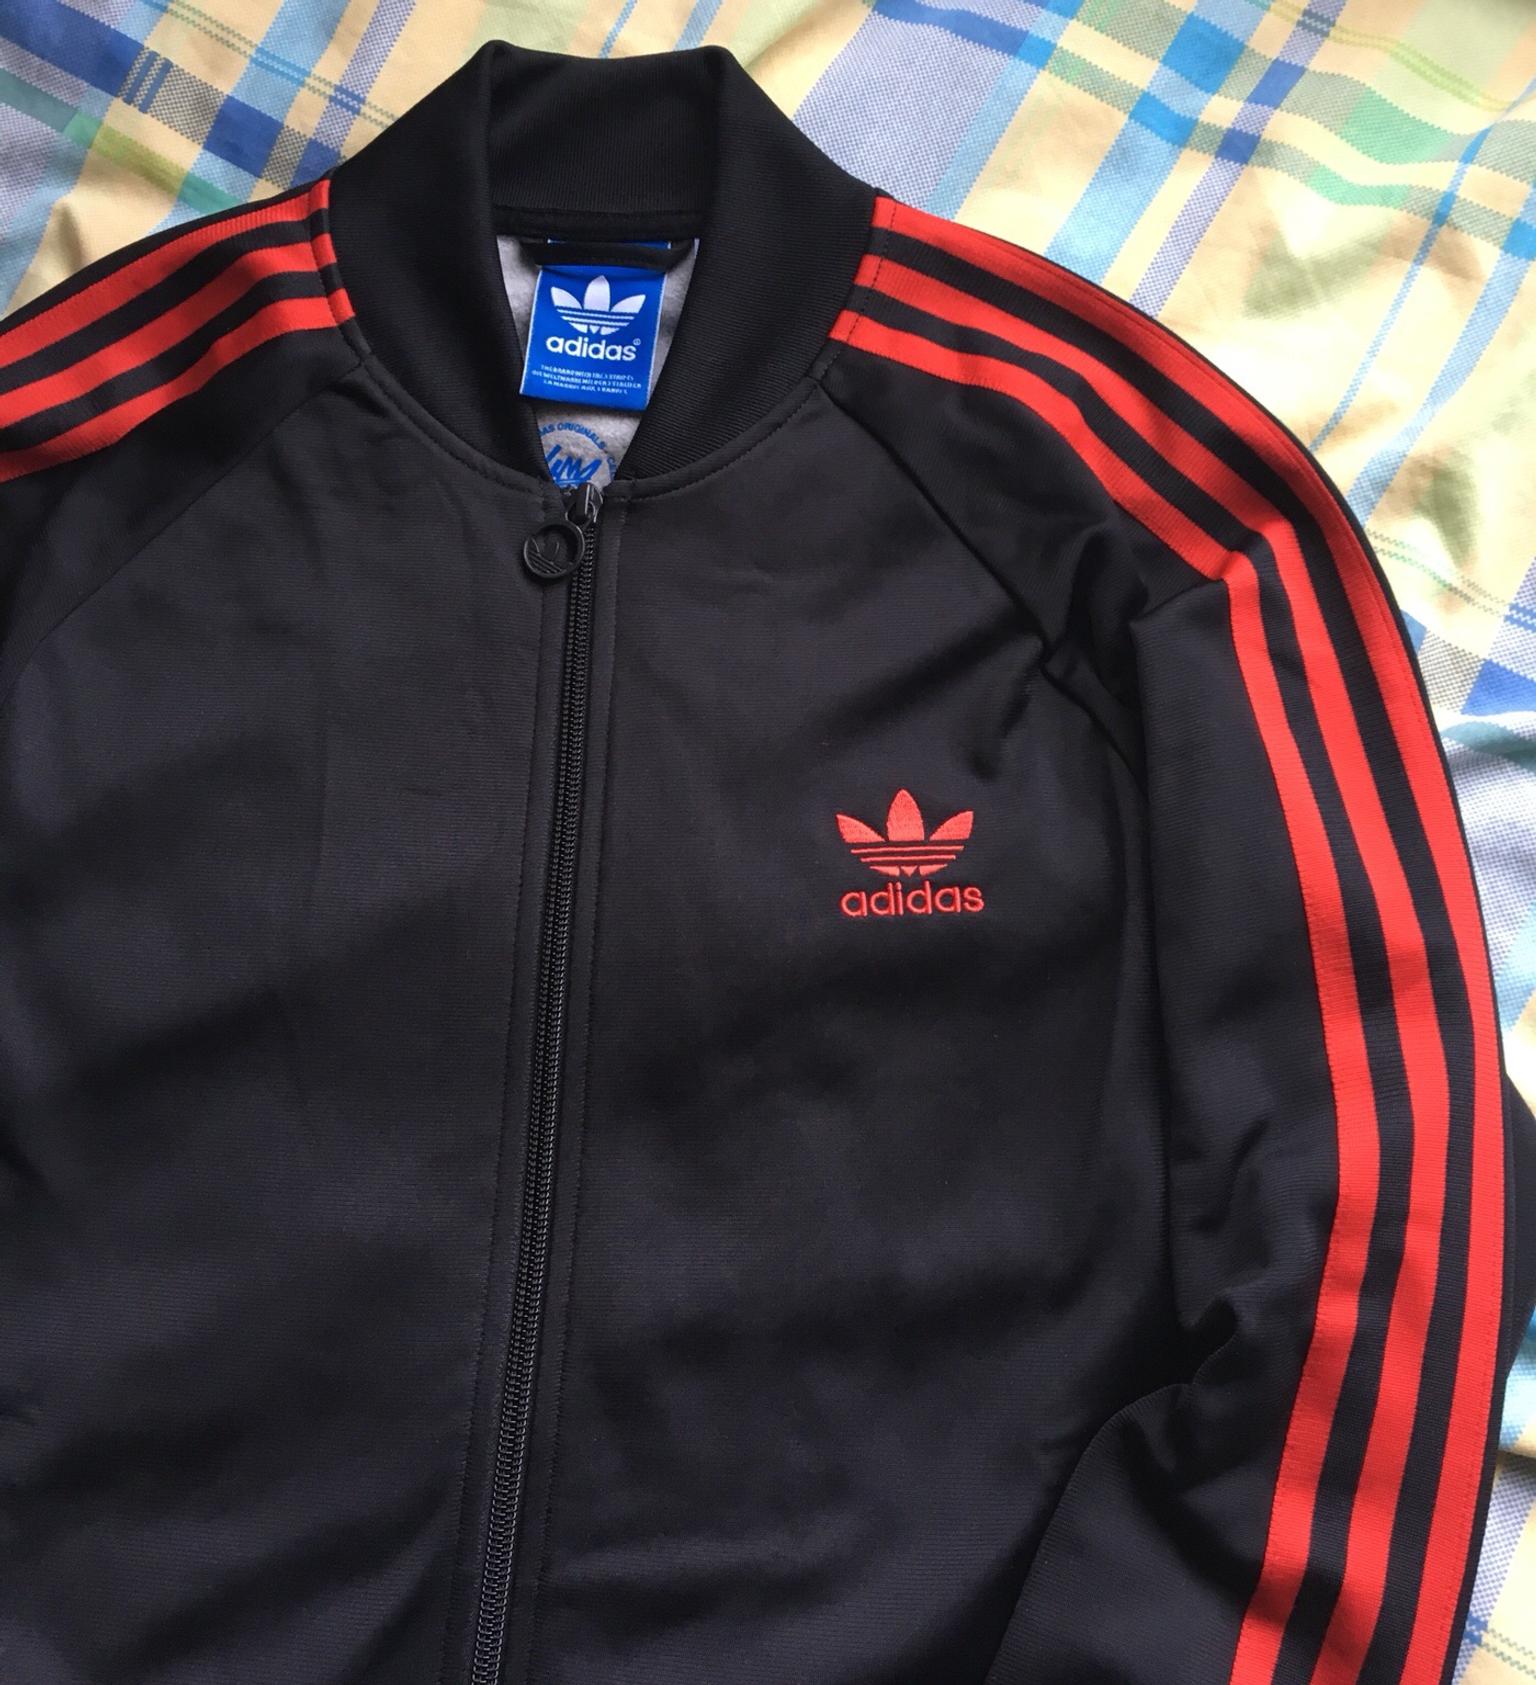 red adidas track top